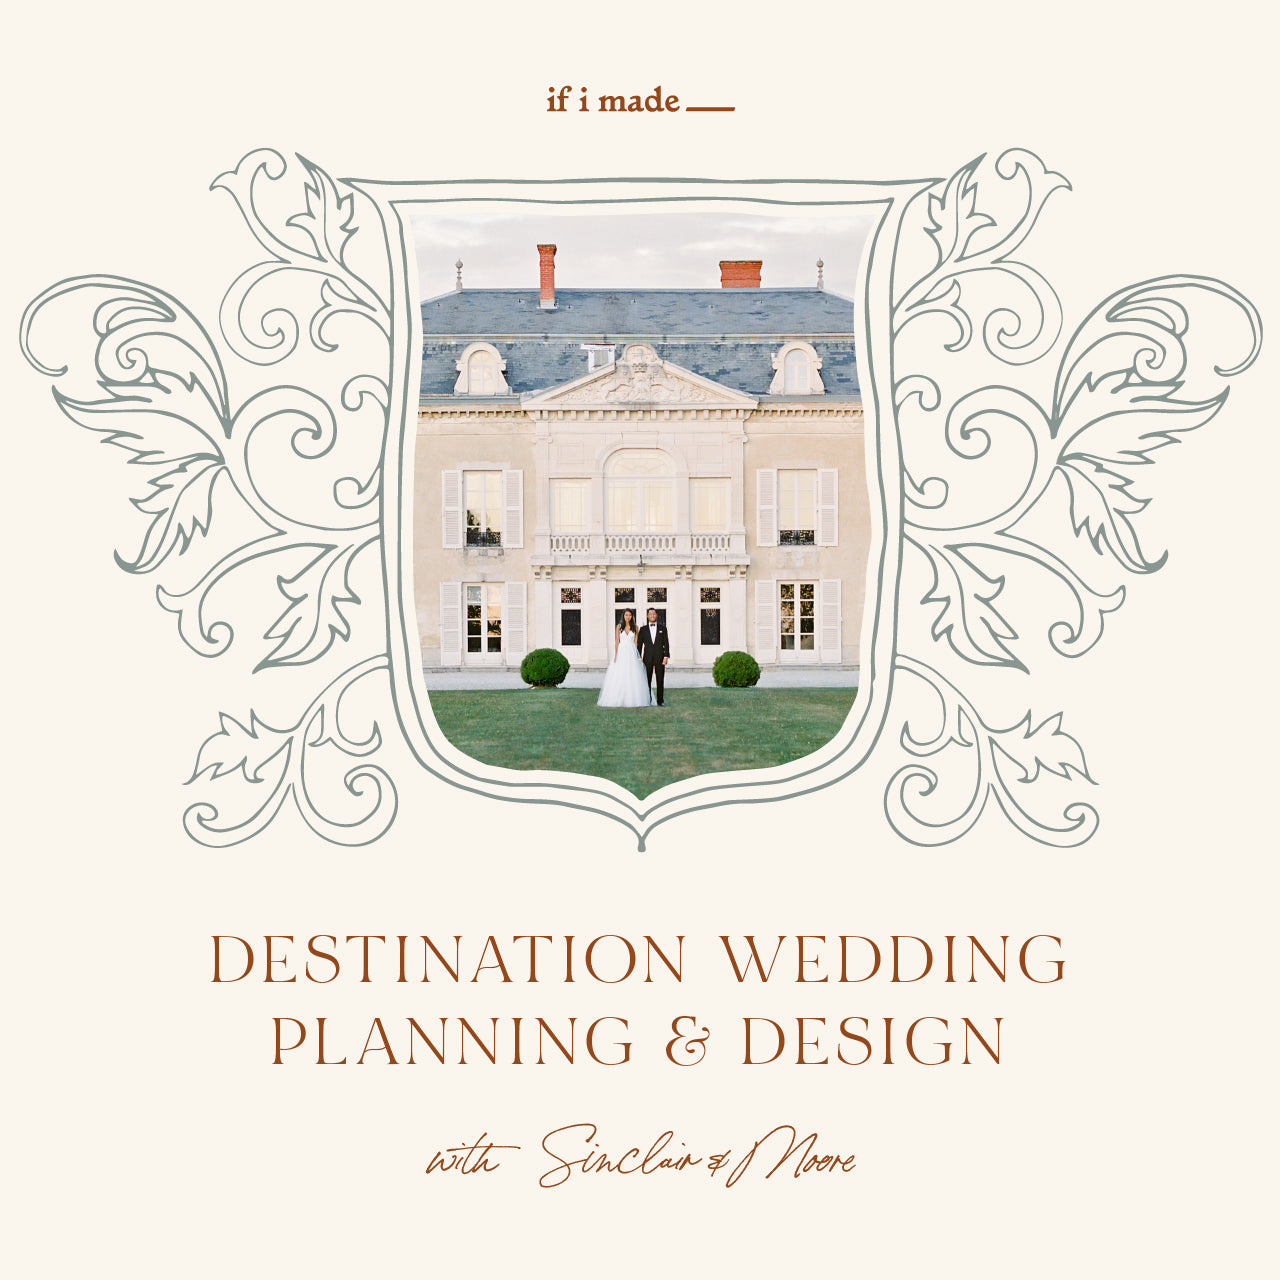 Destination Wedding Planning & Design with Sinclair & Moore (ESPP) - 25 payments of $69